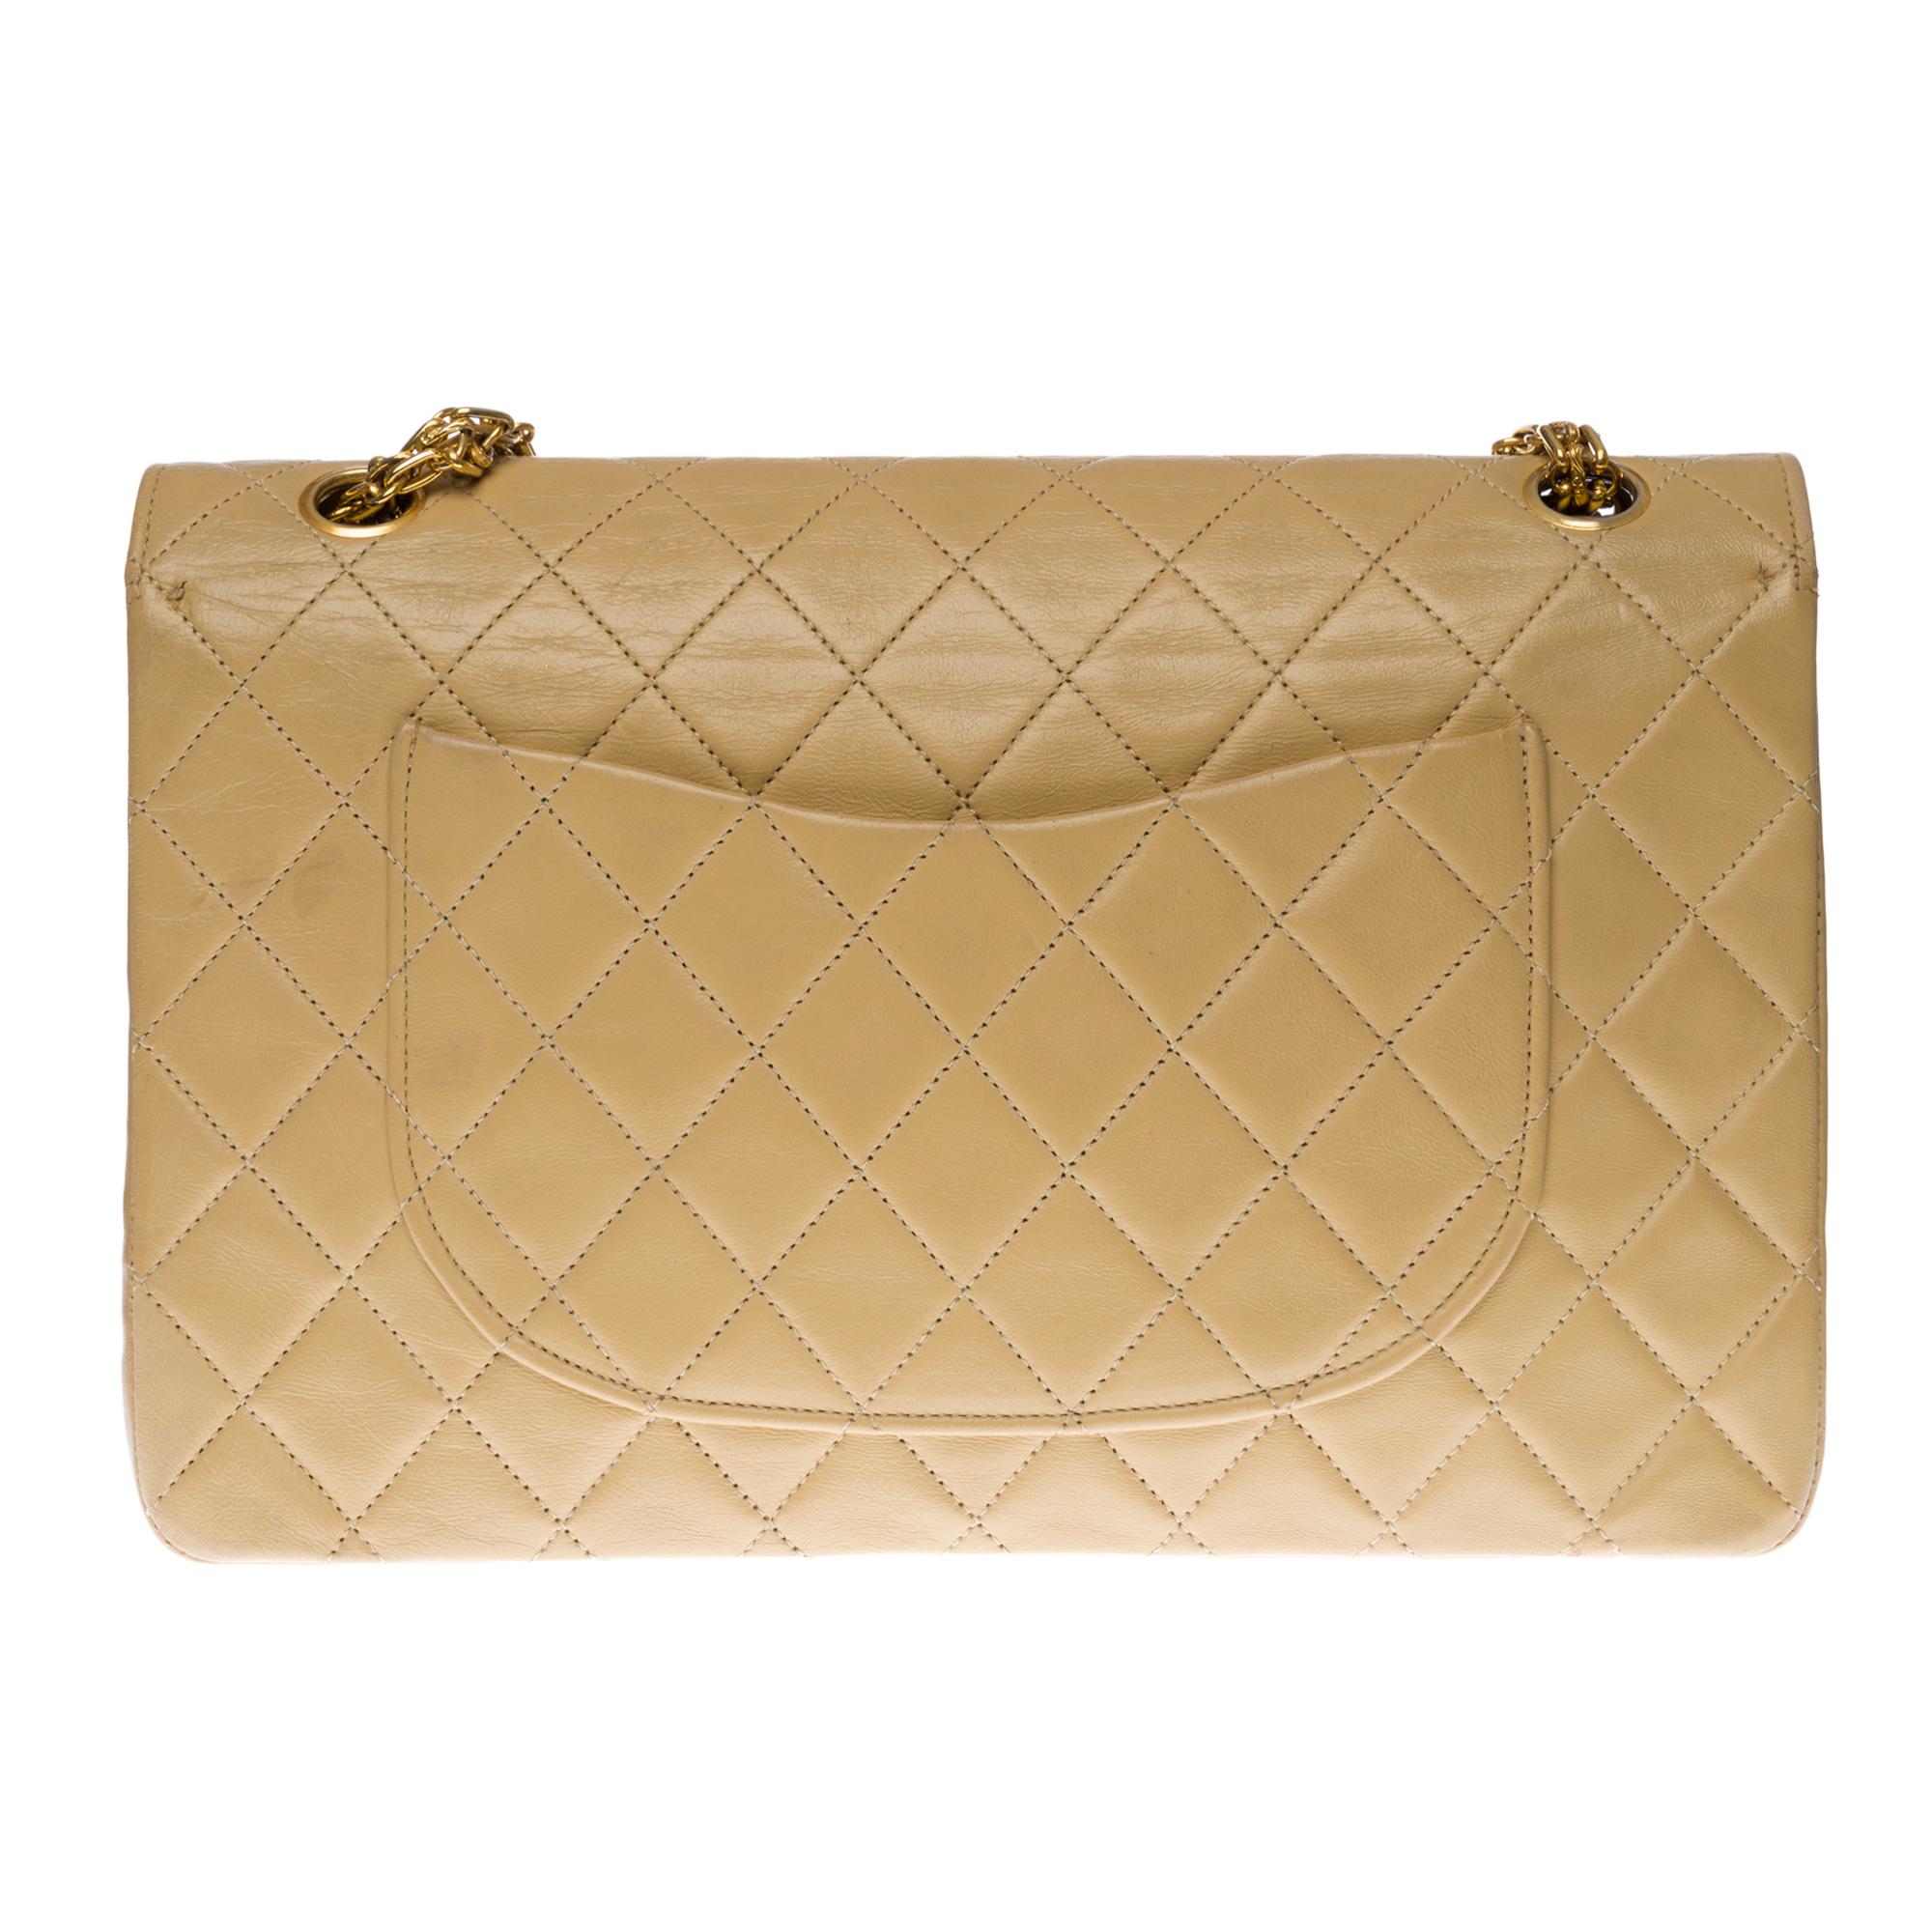 Beautiful Chanel Timeless/Classic handbag with double flap in beige quilted lambskin, gold-plated metal hardware, a Mademoiselle gold-plated metal chain handle allowing a hand or shoulder support

A patch pocket on the back of the bag
Inner lining